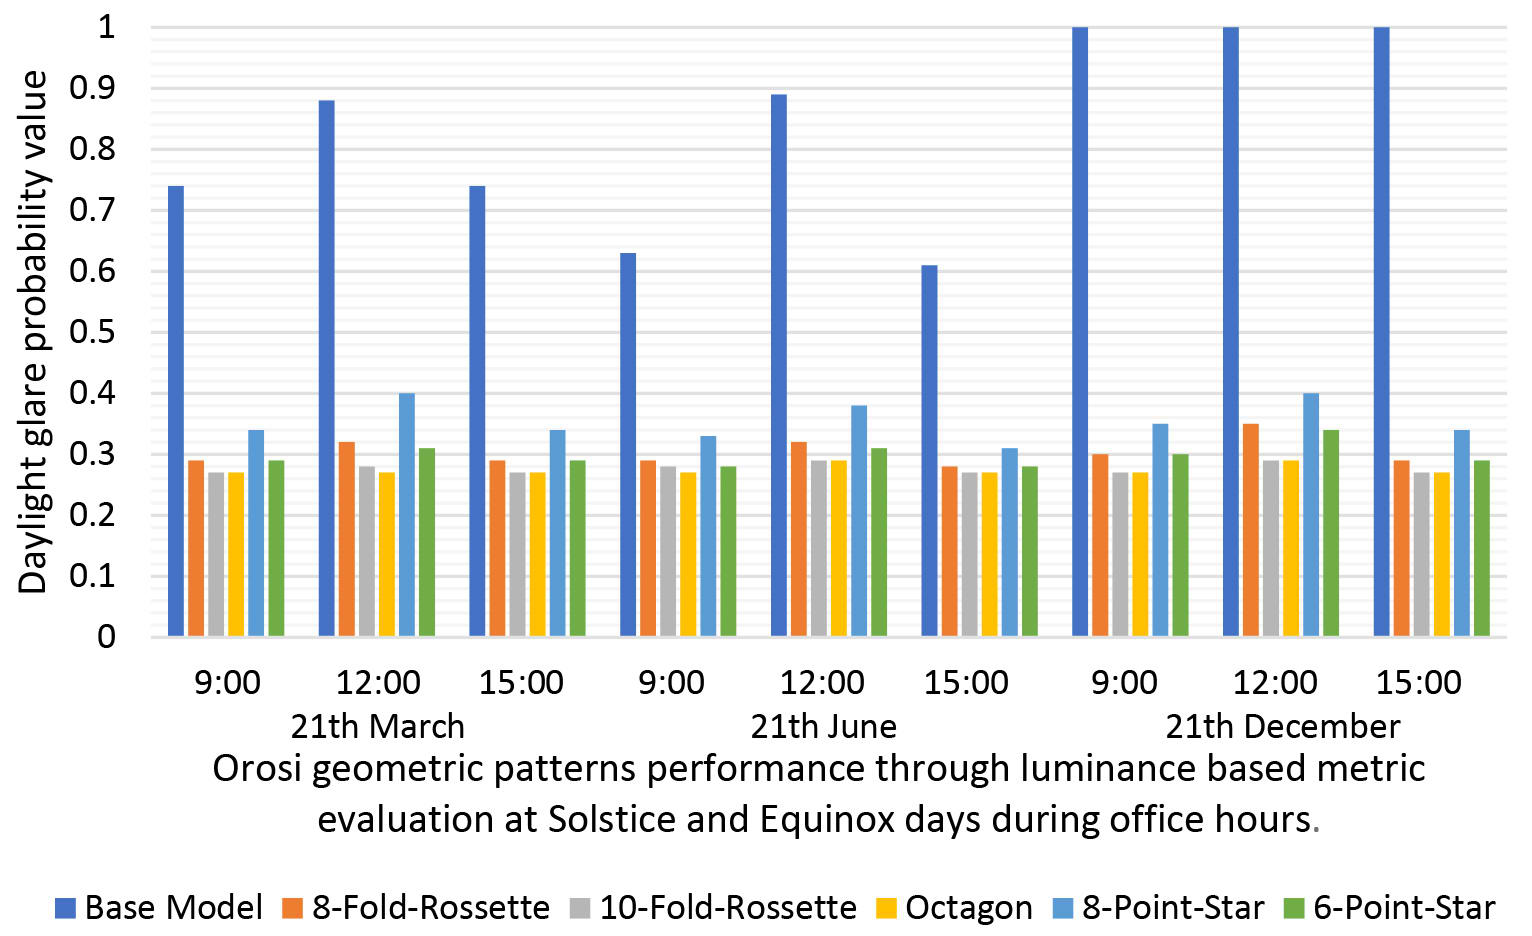 Daylight glare probability of Orosi geometric patterns with thickness of 15 cm at Solstice and Equinox days during office hours.